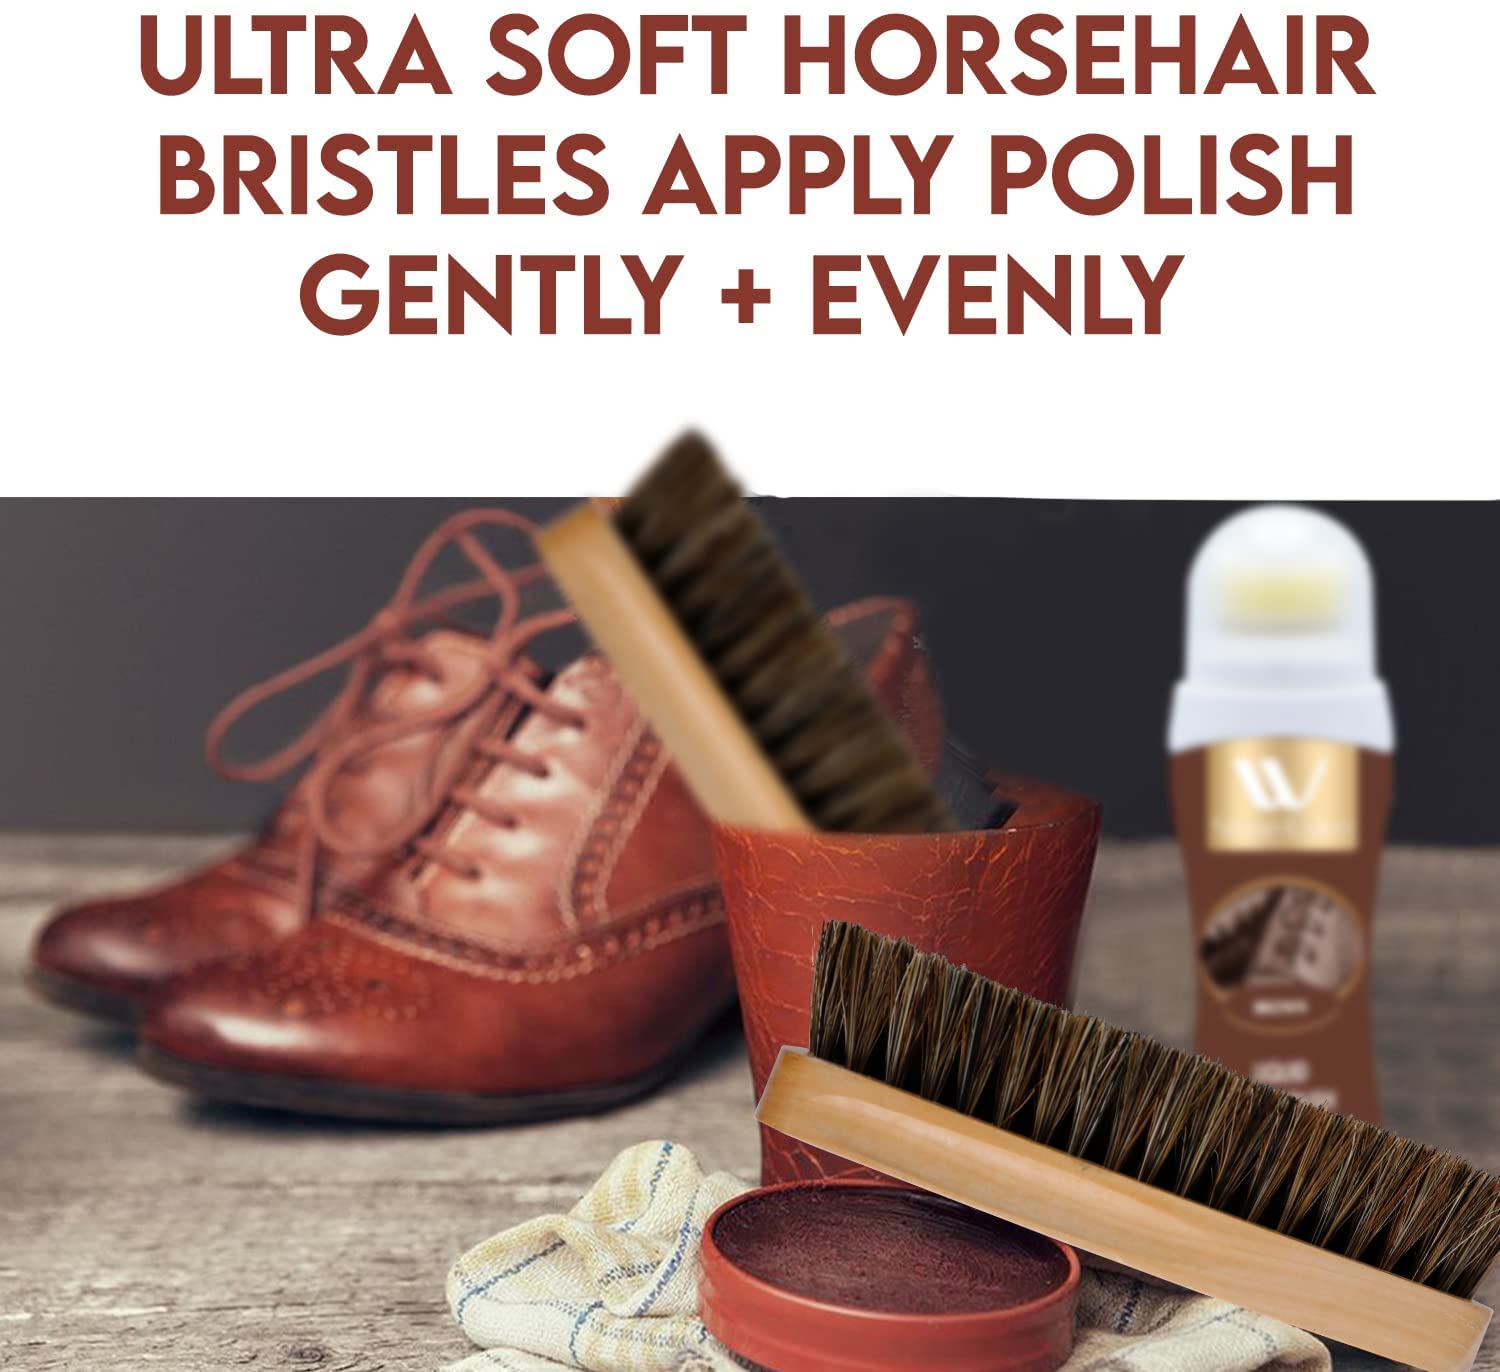 WBM Care Shoe Brush, Protects Leather from Scuffs and Scratches, Best for All Kind of Leather Surfaces, Shoe Cleaner, Horsehair Boot Brush, Pack of 2 (6308A-2PCS)